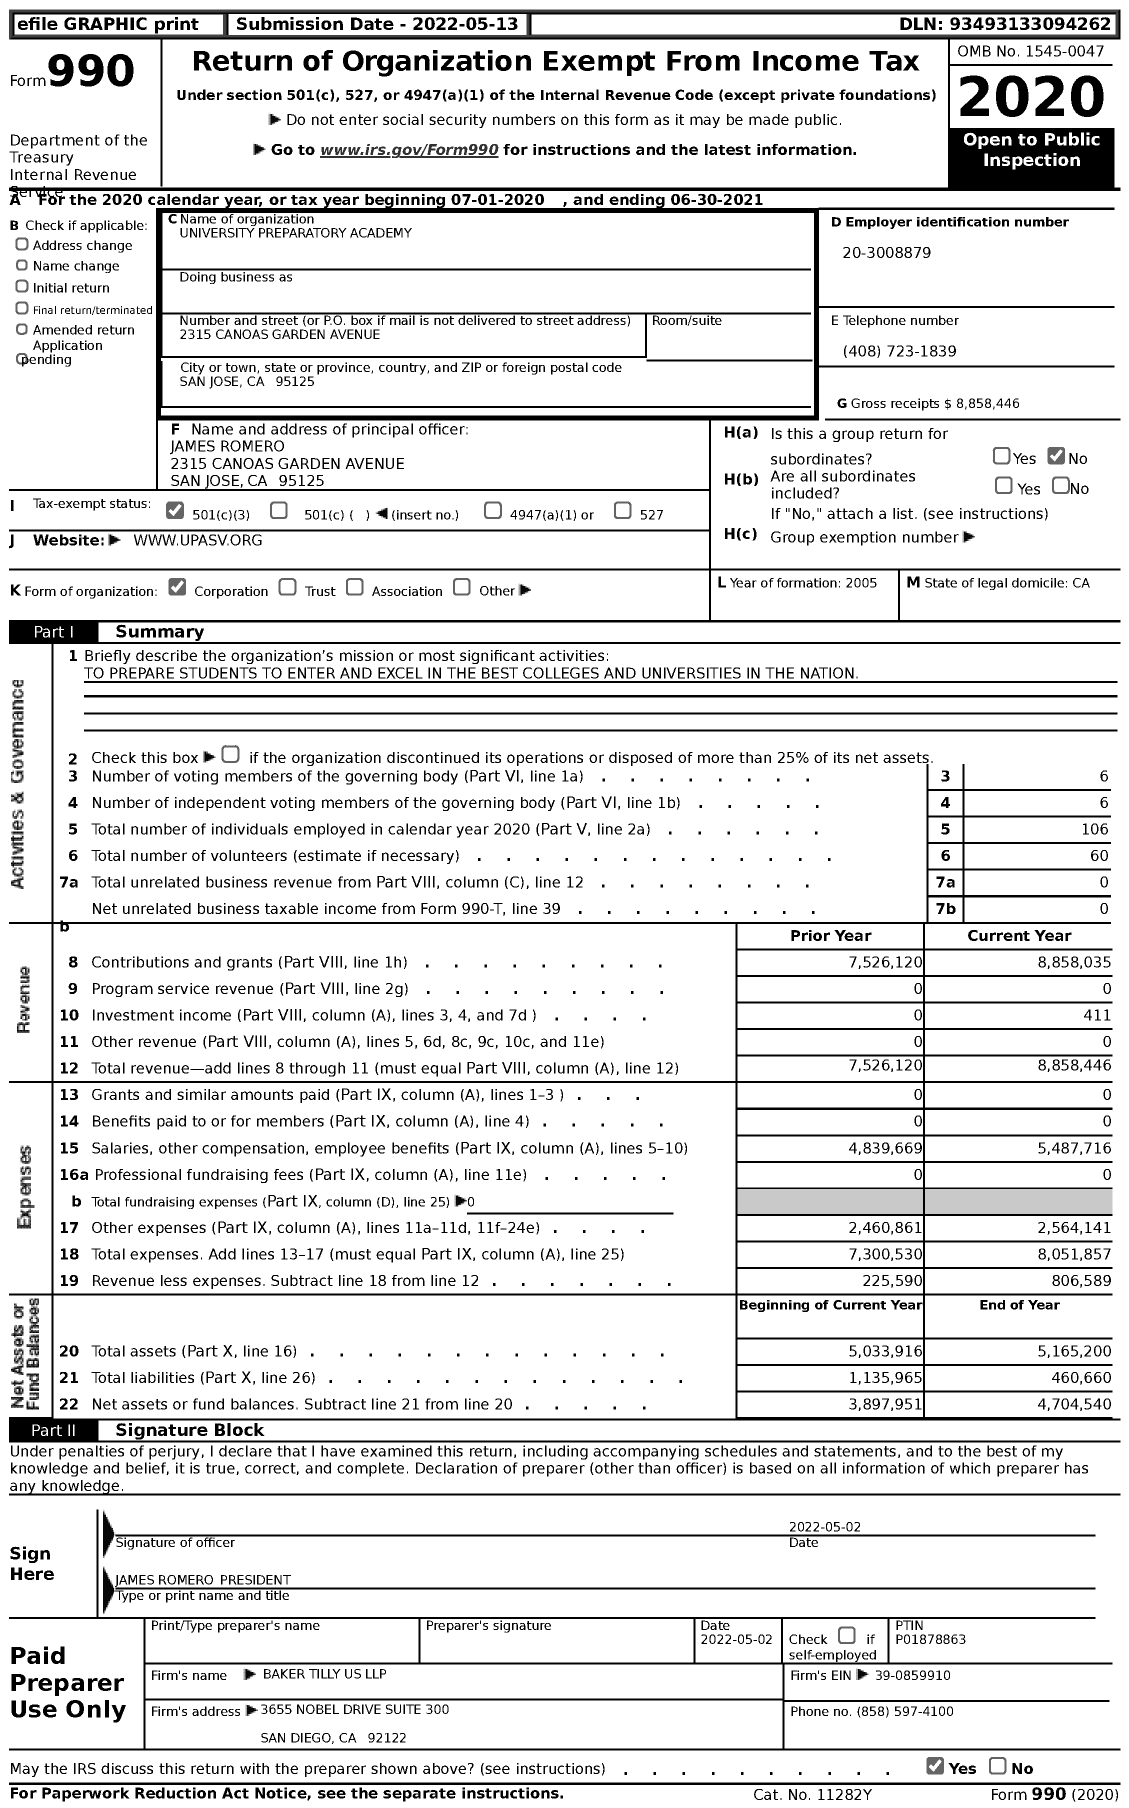 Image of first page of 2020 Form 990 for University Preparatory Academy (UPA)